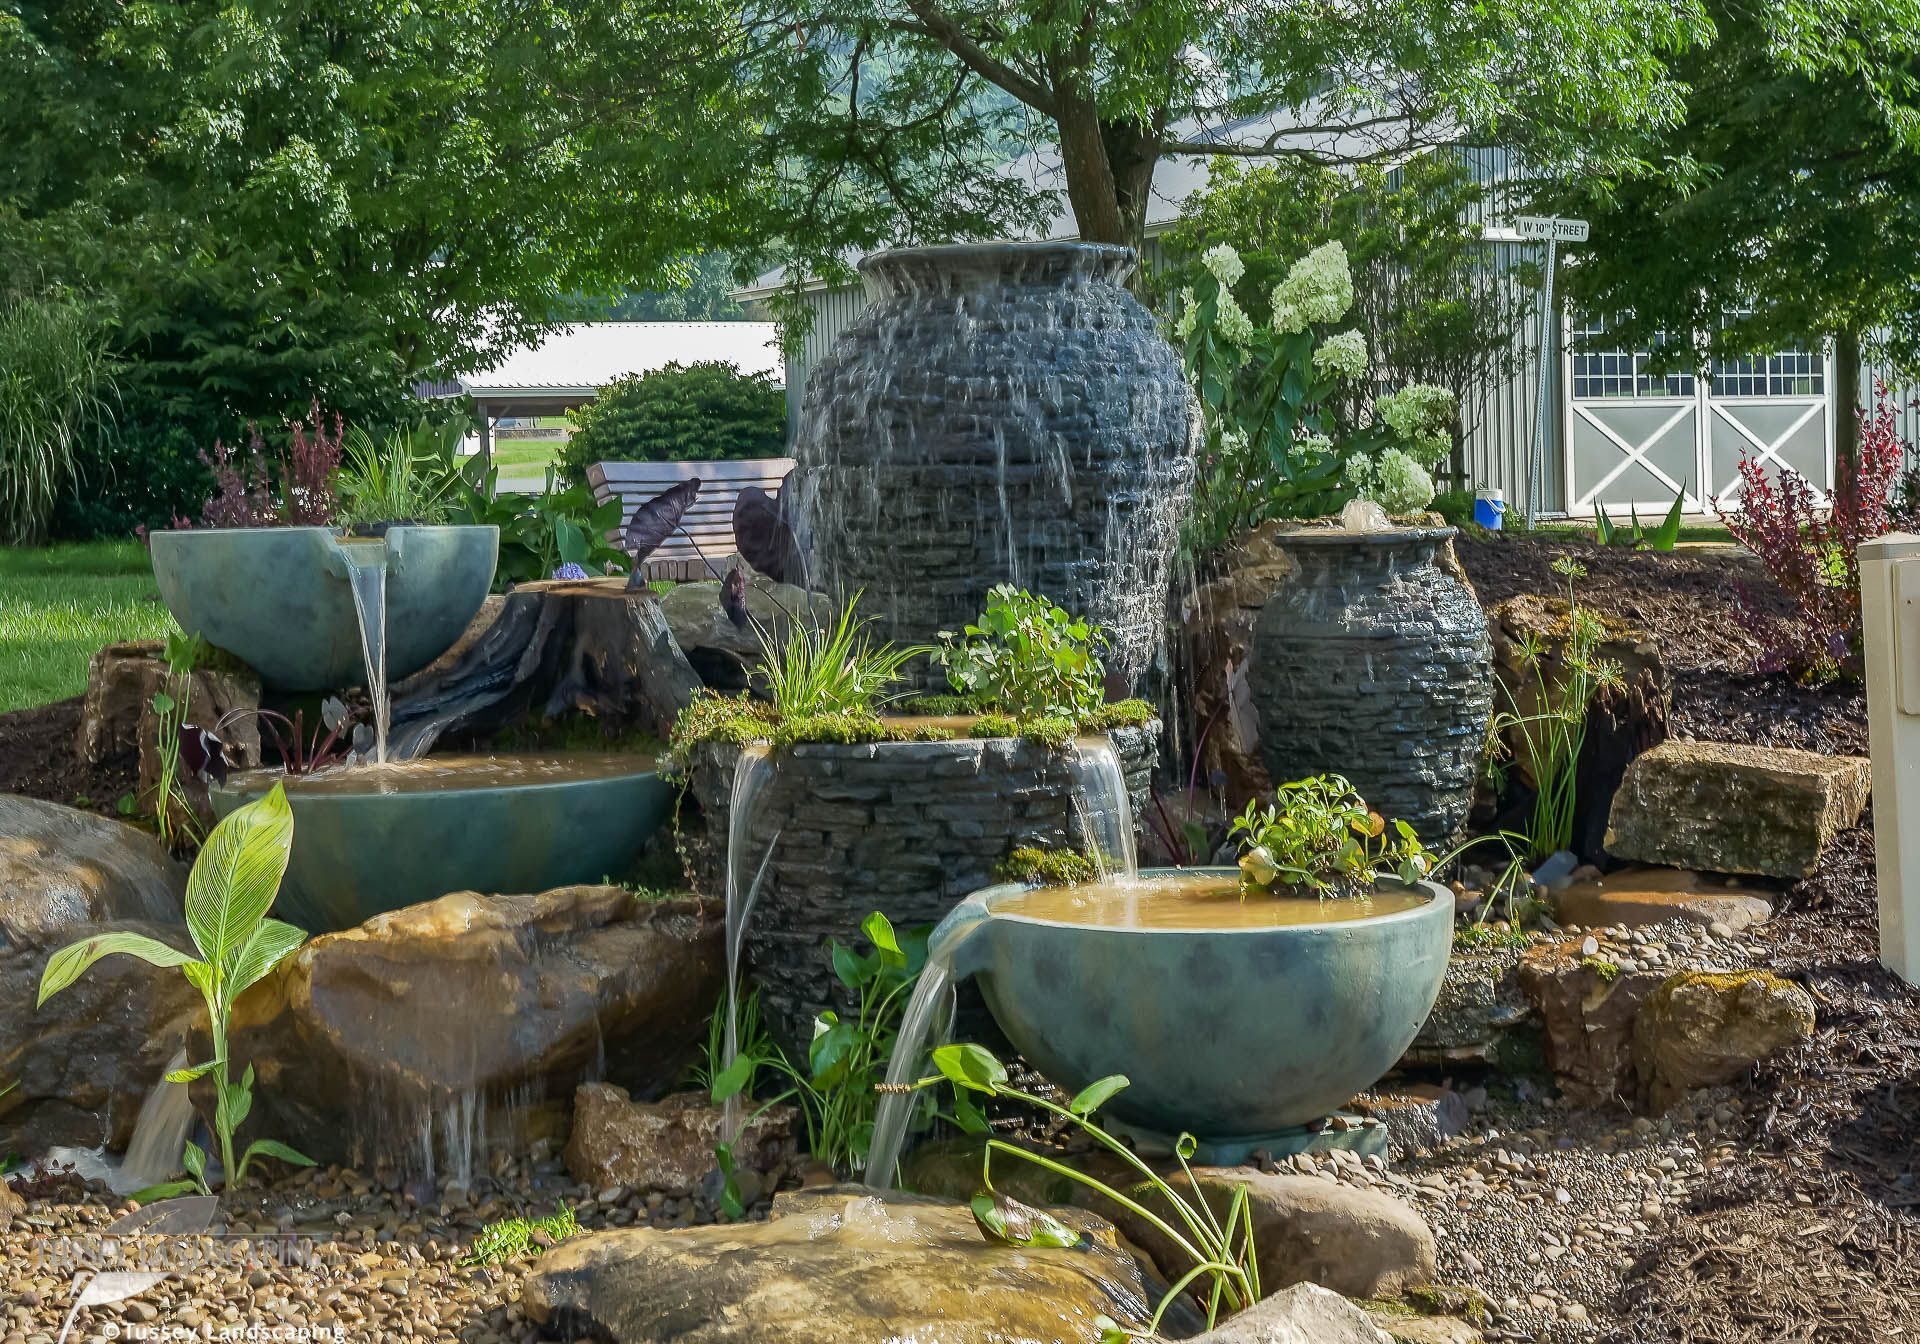 A water feature in a backyard with rocks and pots.